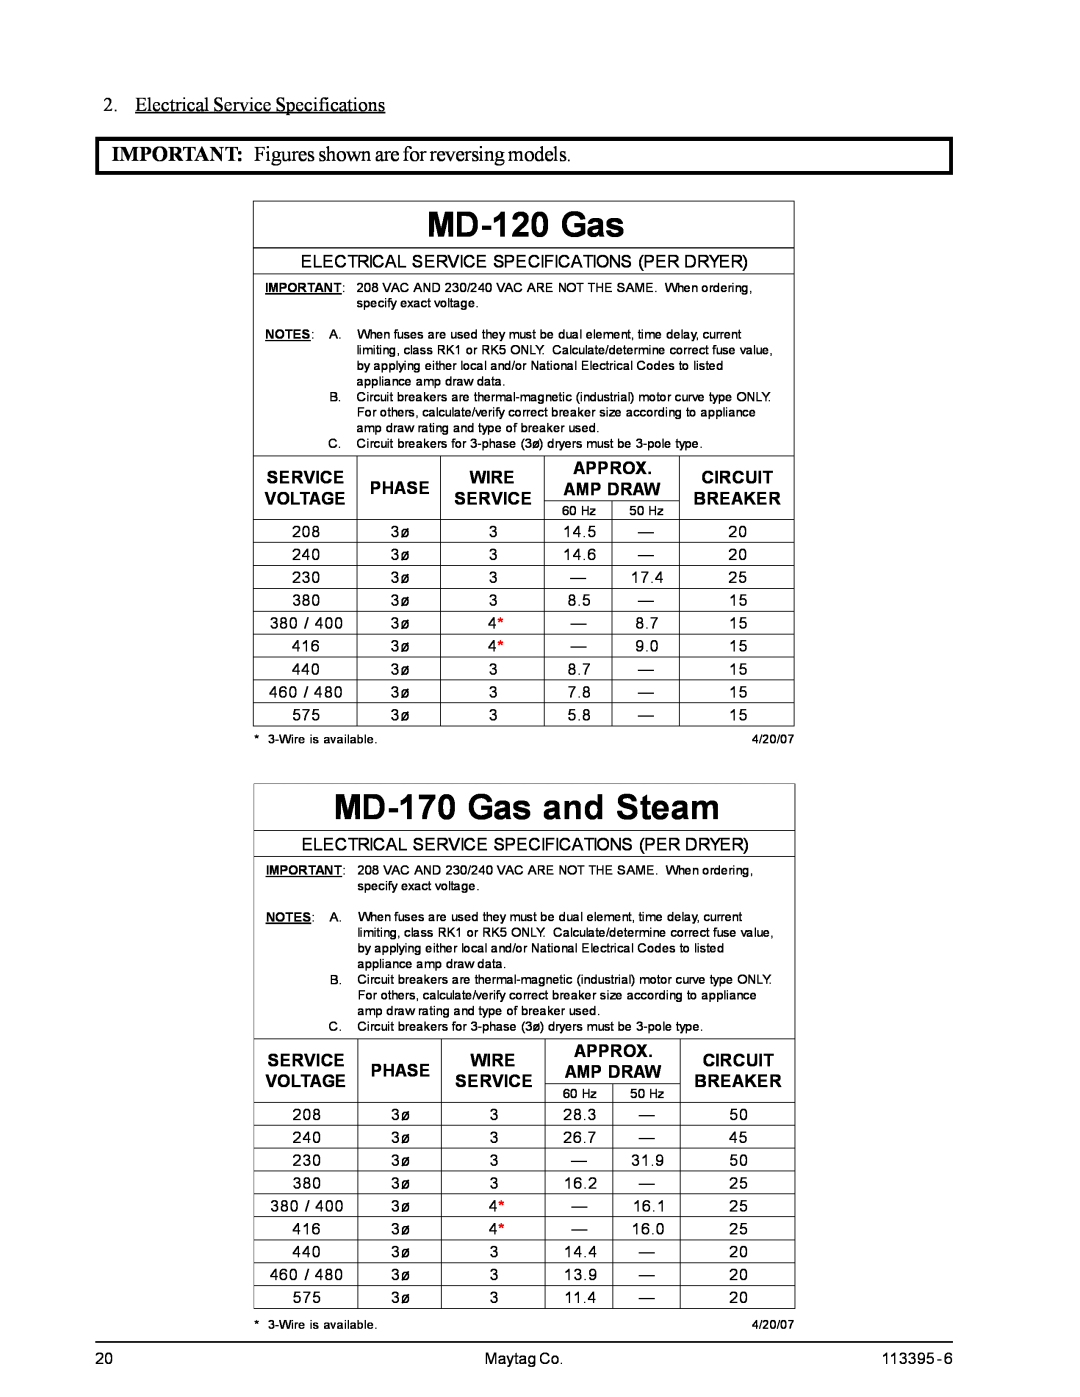 American Dryer Corp MD-170PTVW MD-120 Gas, MD-170 Gas and Steam, IMPORTANT Figures shown are for reversing models 